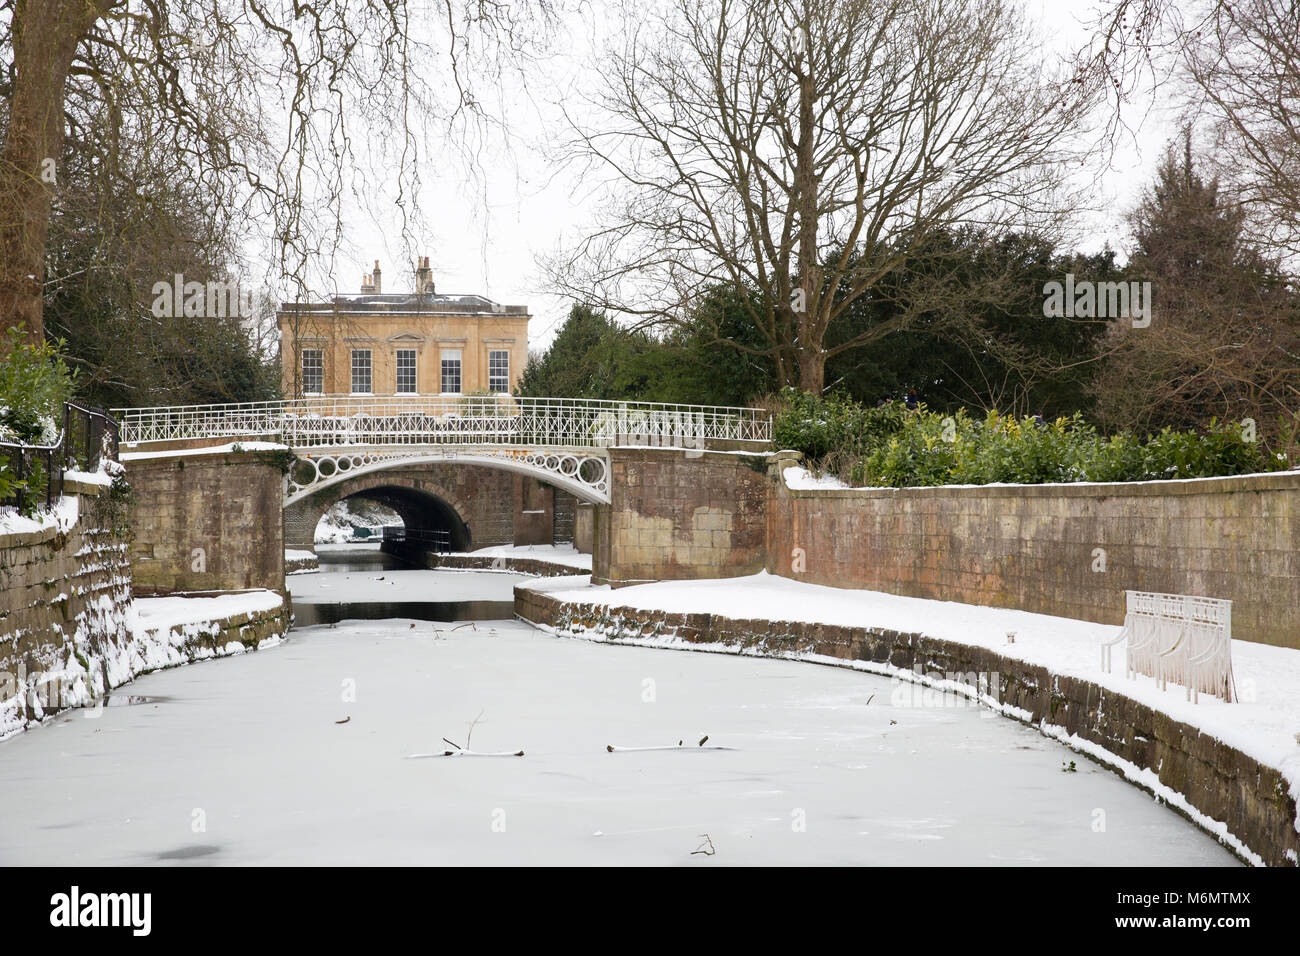 Wintry view of the Kennet and Avon Canal in Sydney Gardens, Bath, England during the big freeze at the beginning of March 2018. Stock Photo